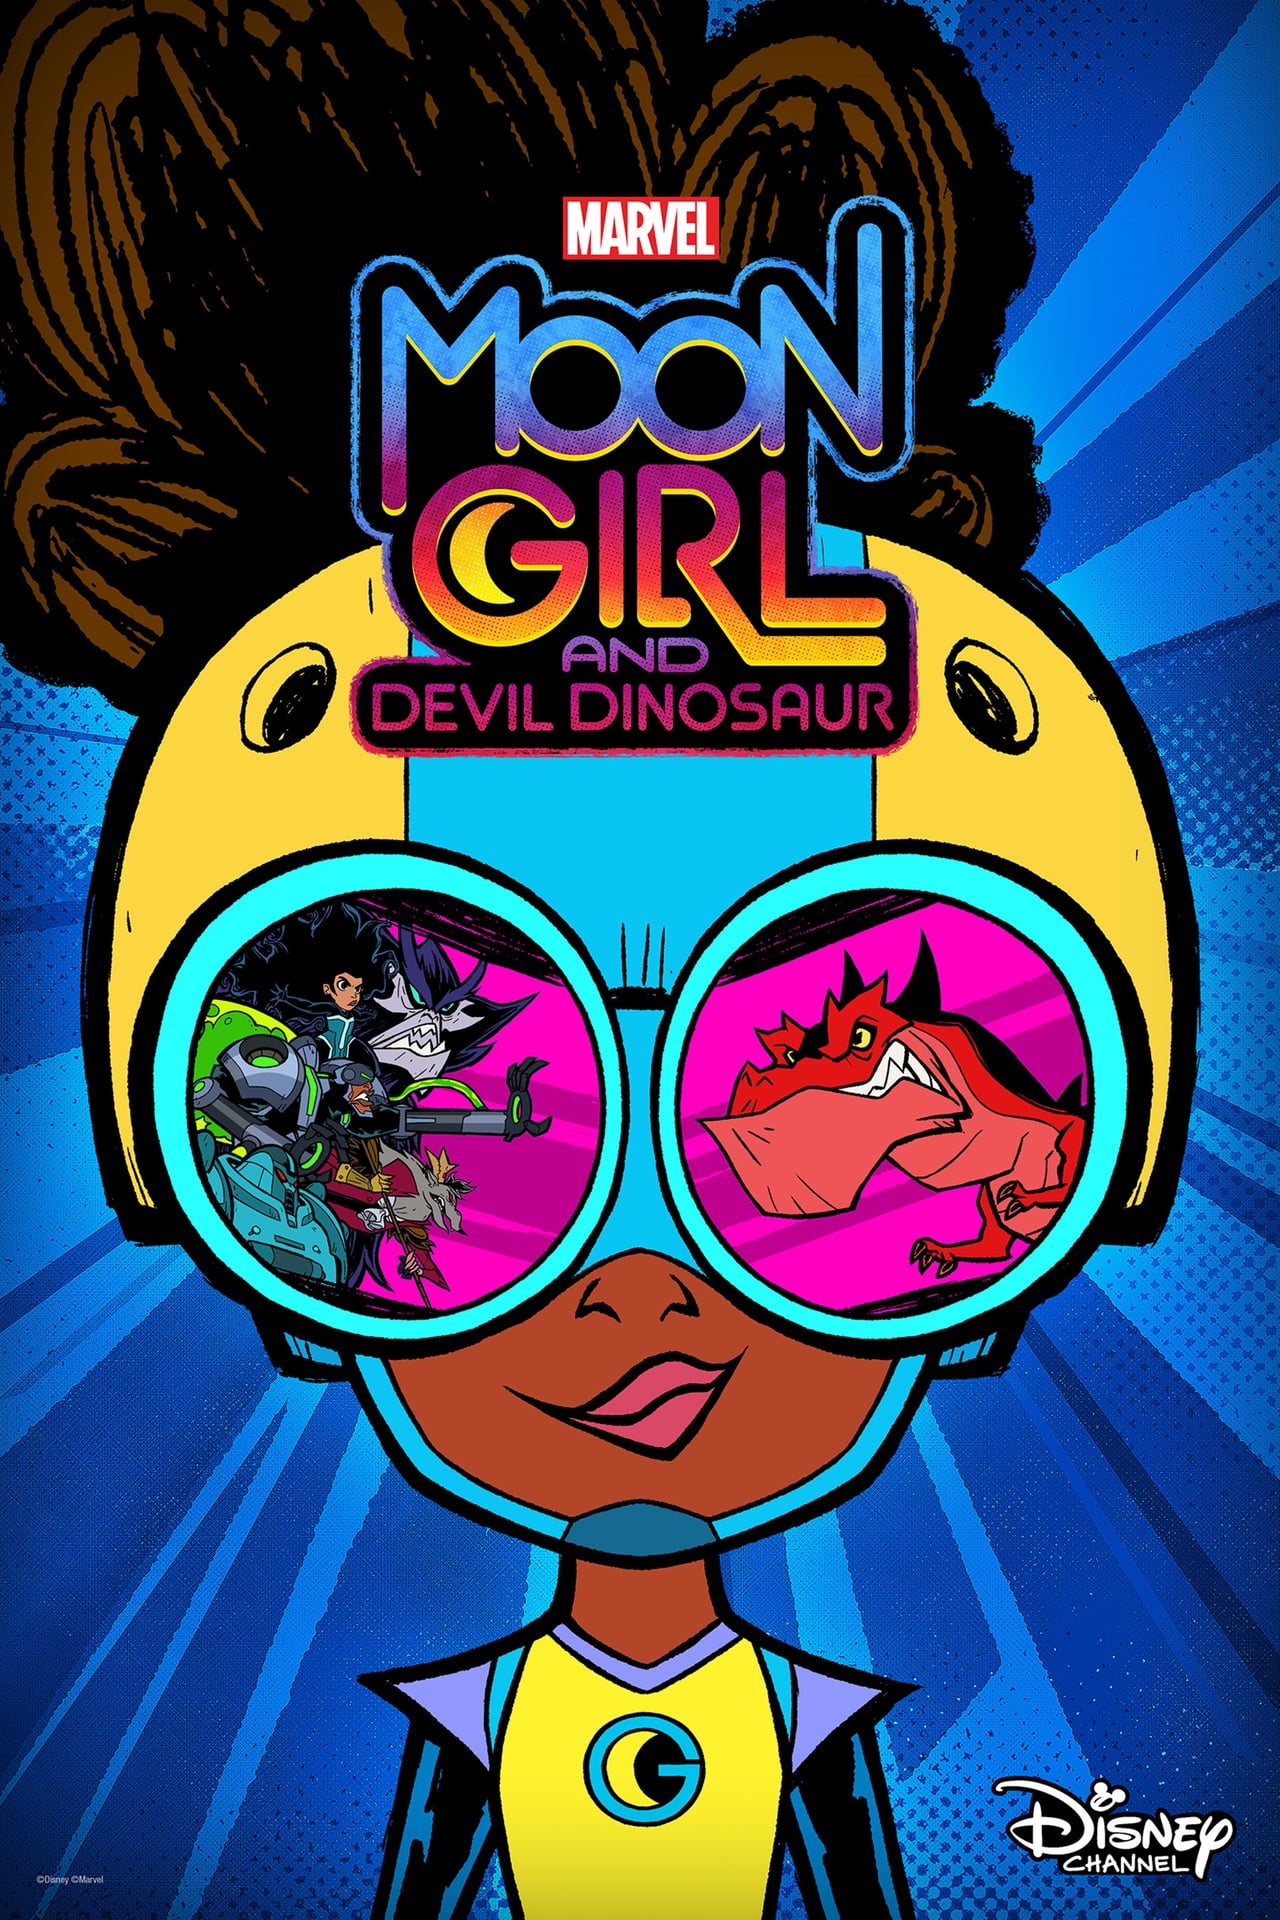 Read more about the article Marvels Moon Girl and Devil Dinosaur (Episode 1 Added) | TV Series